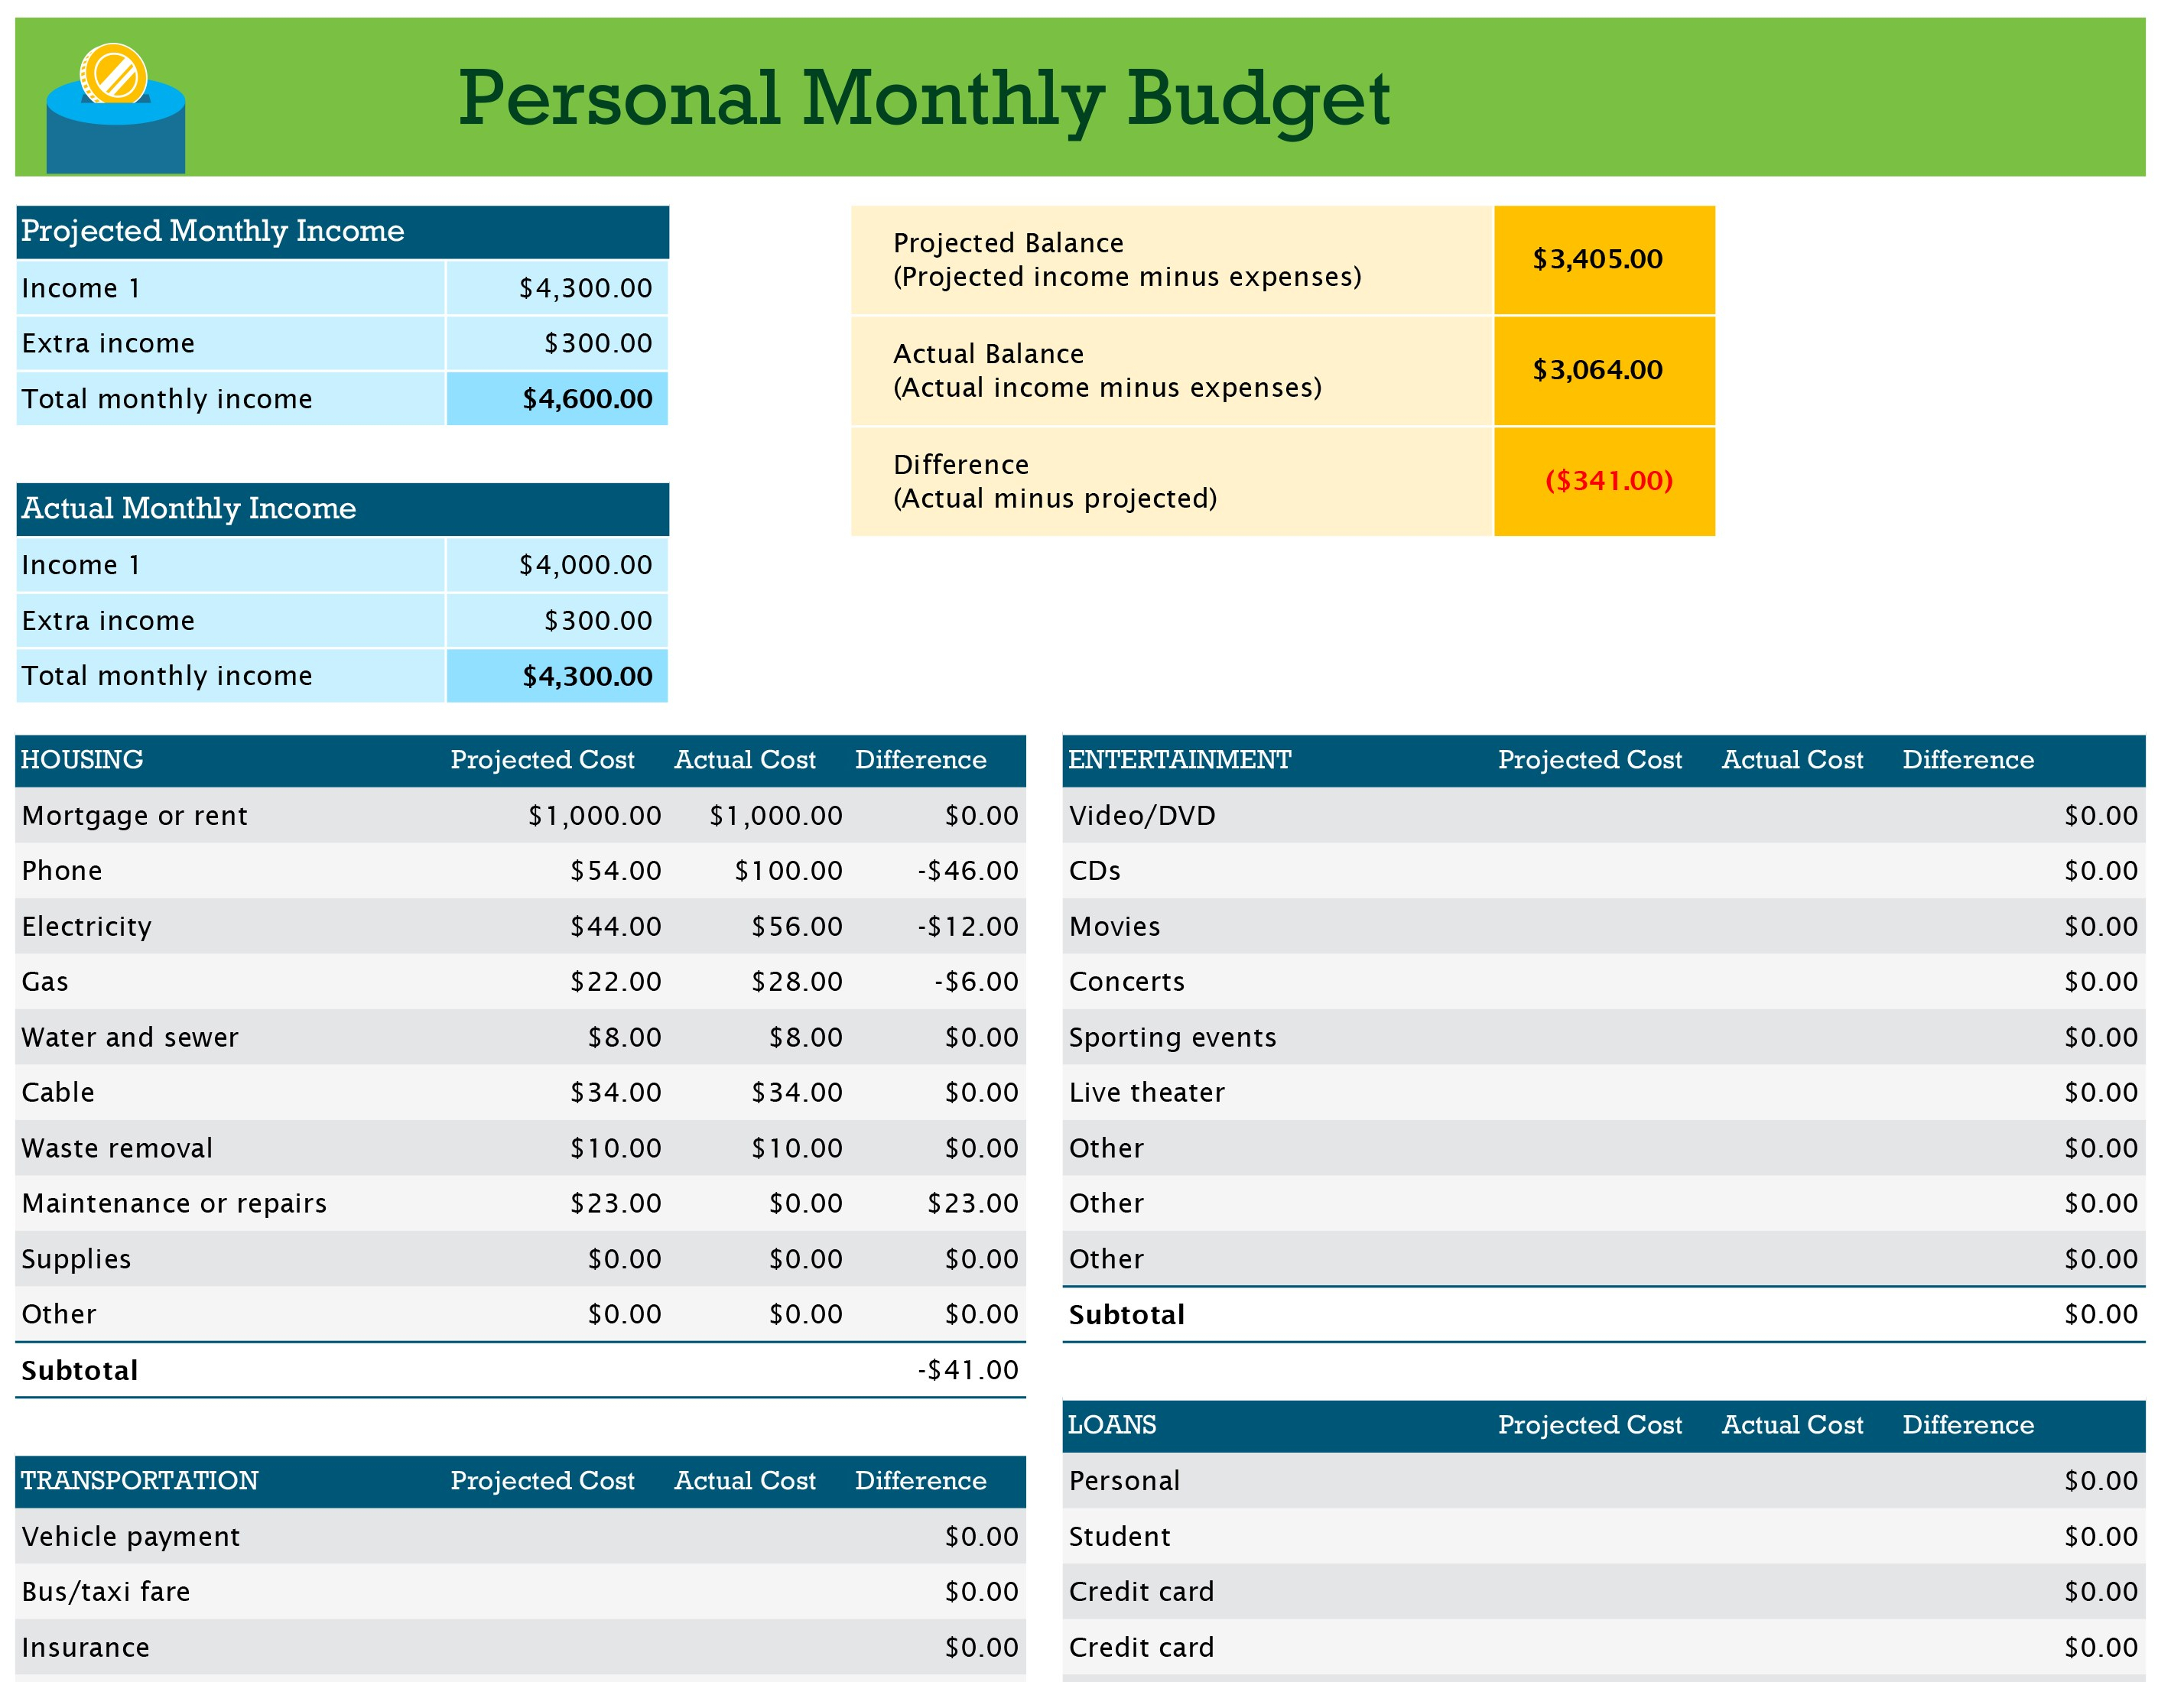 Budget Vs Actual Spreadsheet Template intended for Personal Monthly Budget